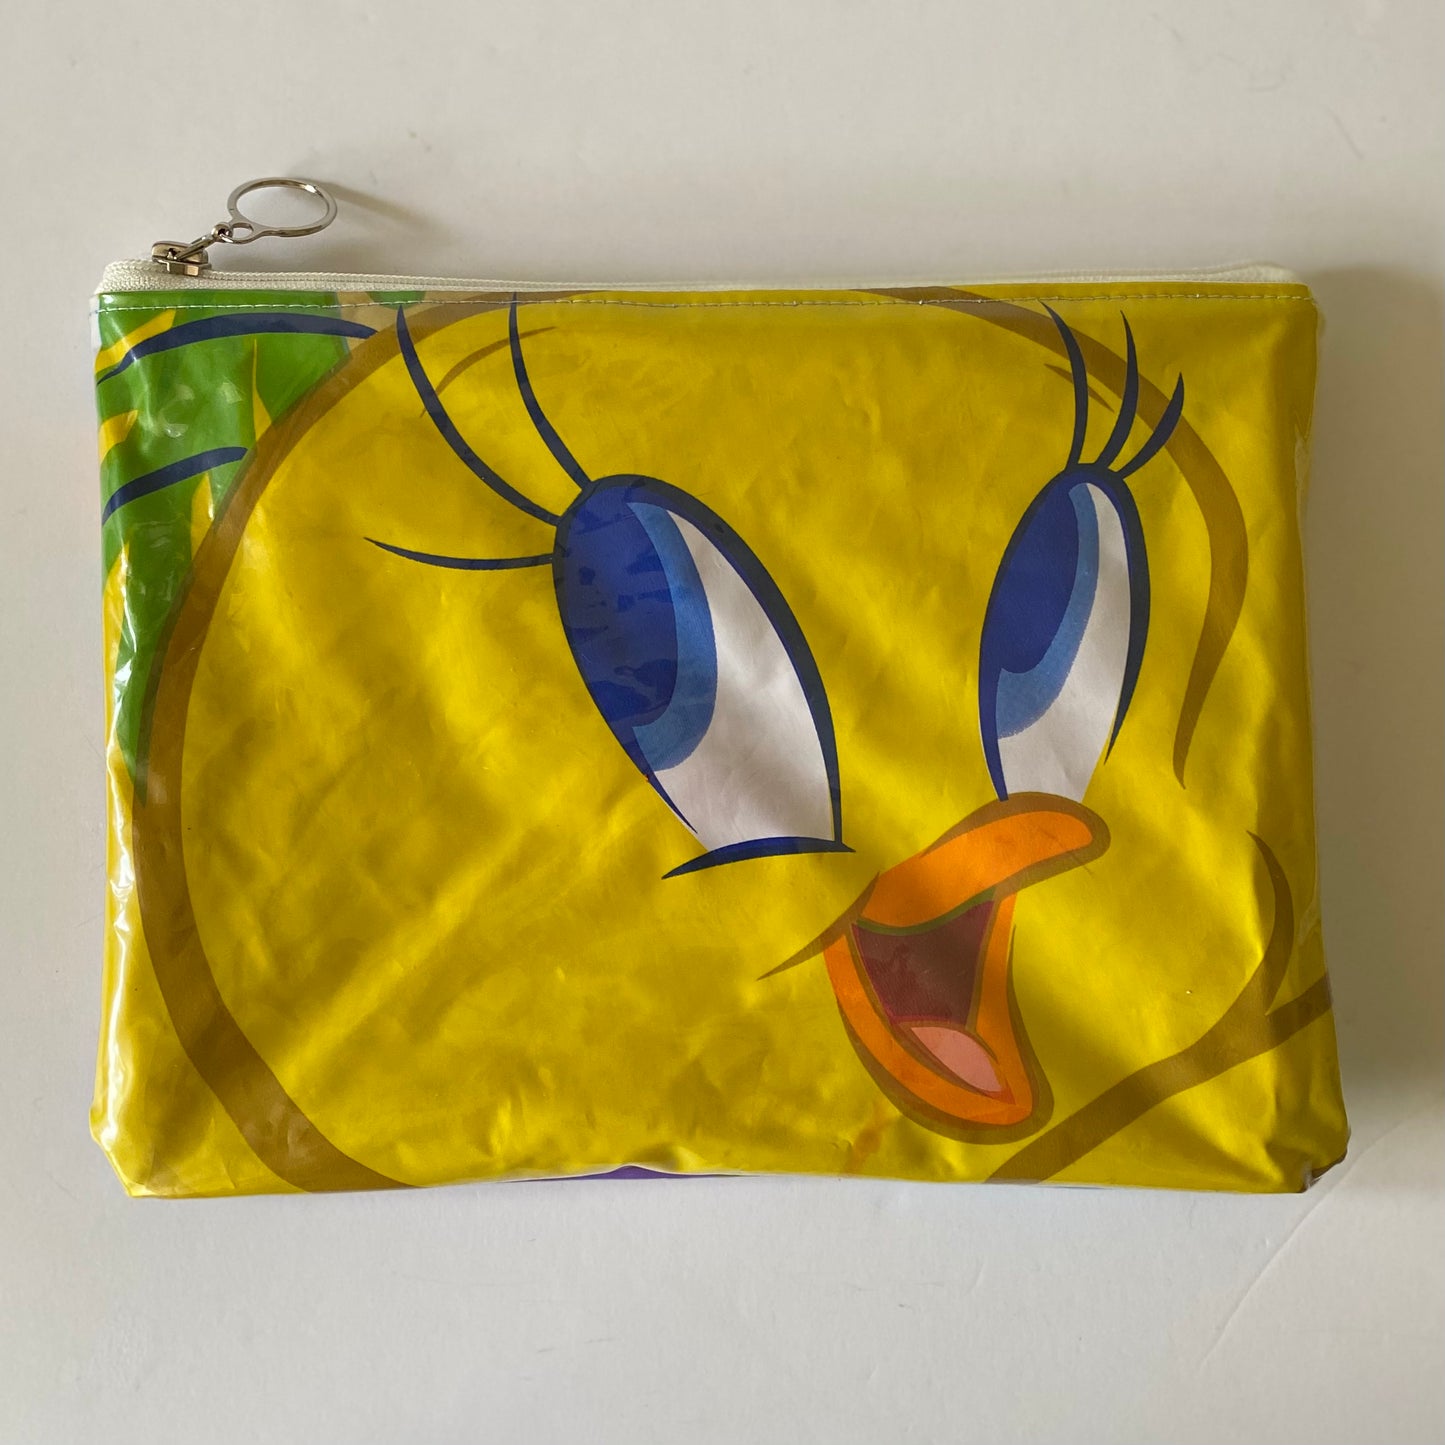 iPad sleeve made from recycled pool inflatables